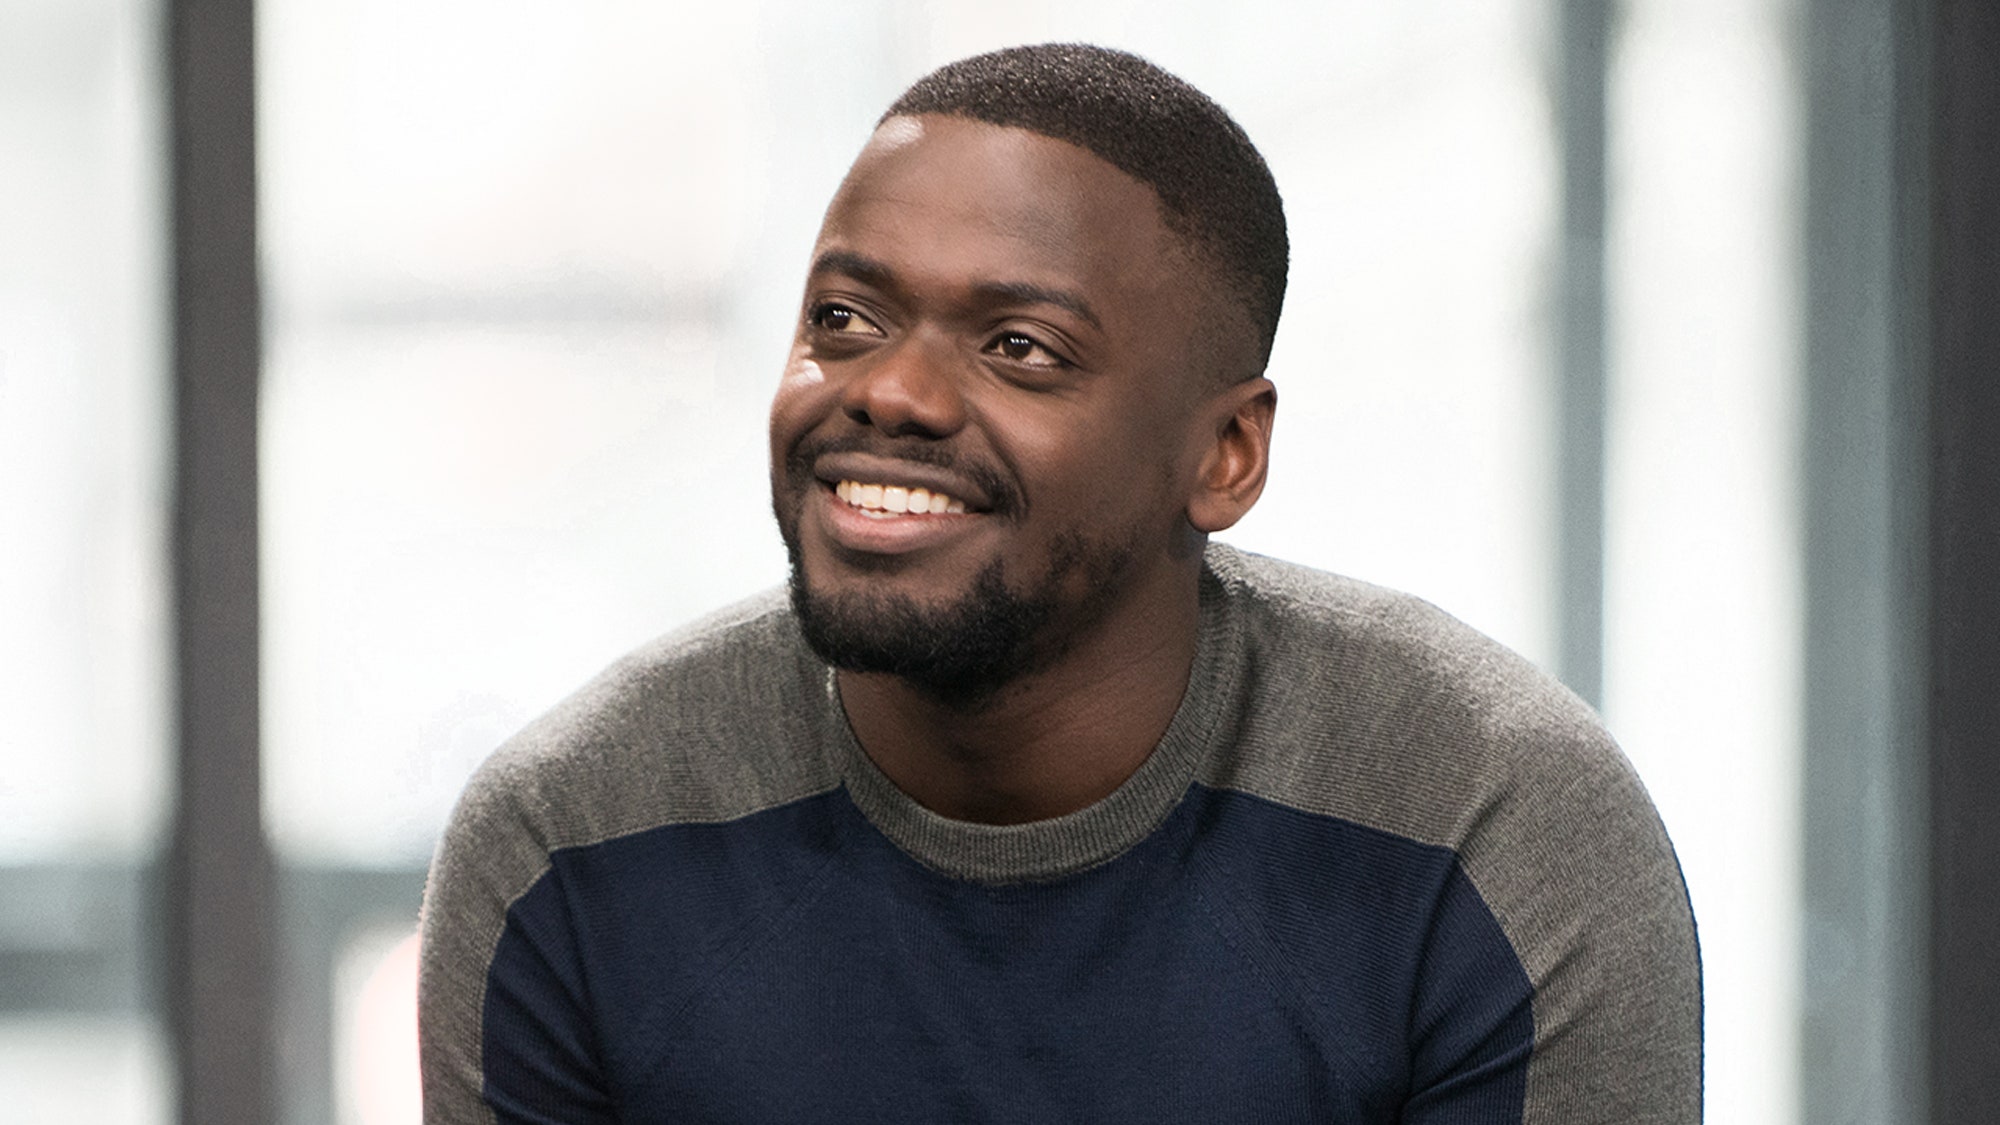 Daniel Kaluuya to join the Spider-Verse as Spider-Punk